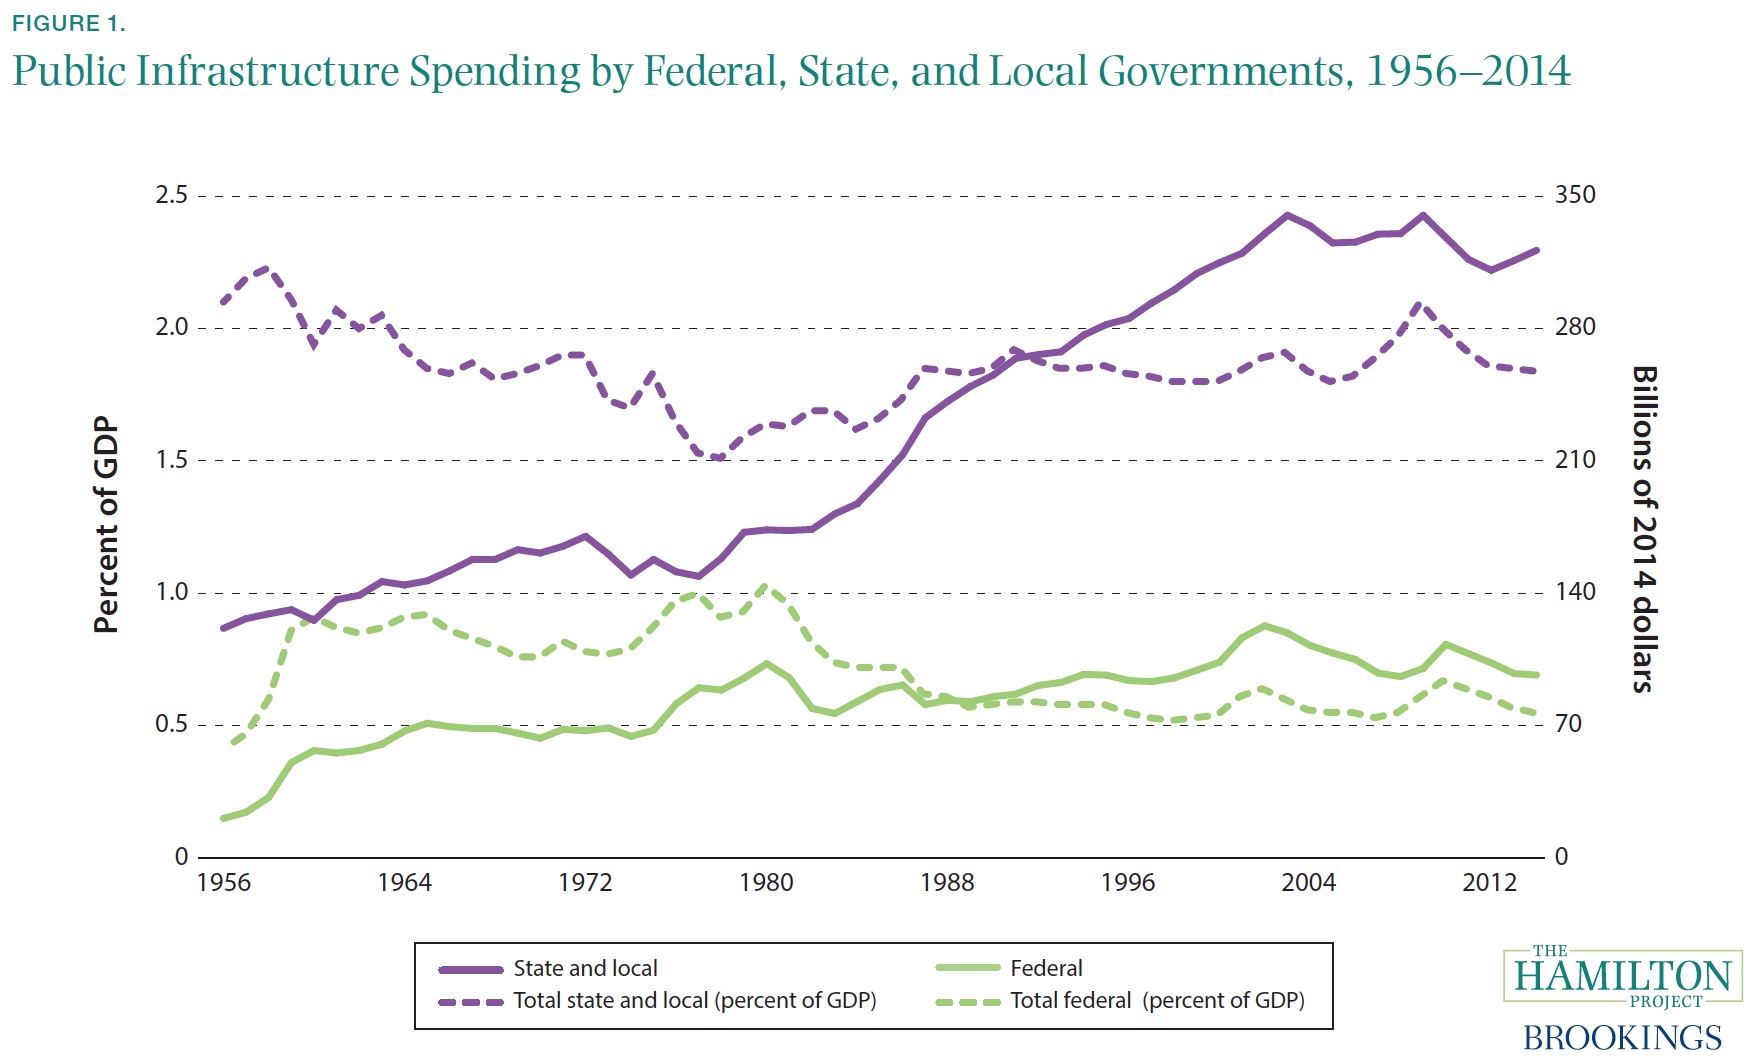 FIGURE 1. Public Infrastructure Spending by Federal, State, and Local Governments, 1956–2014